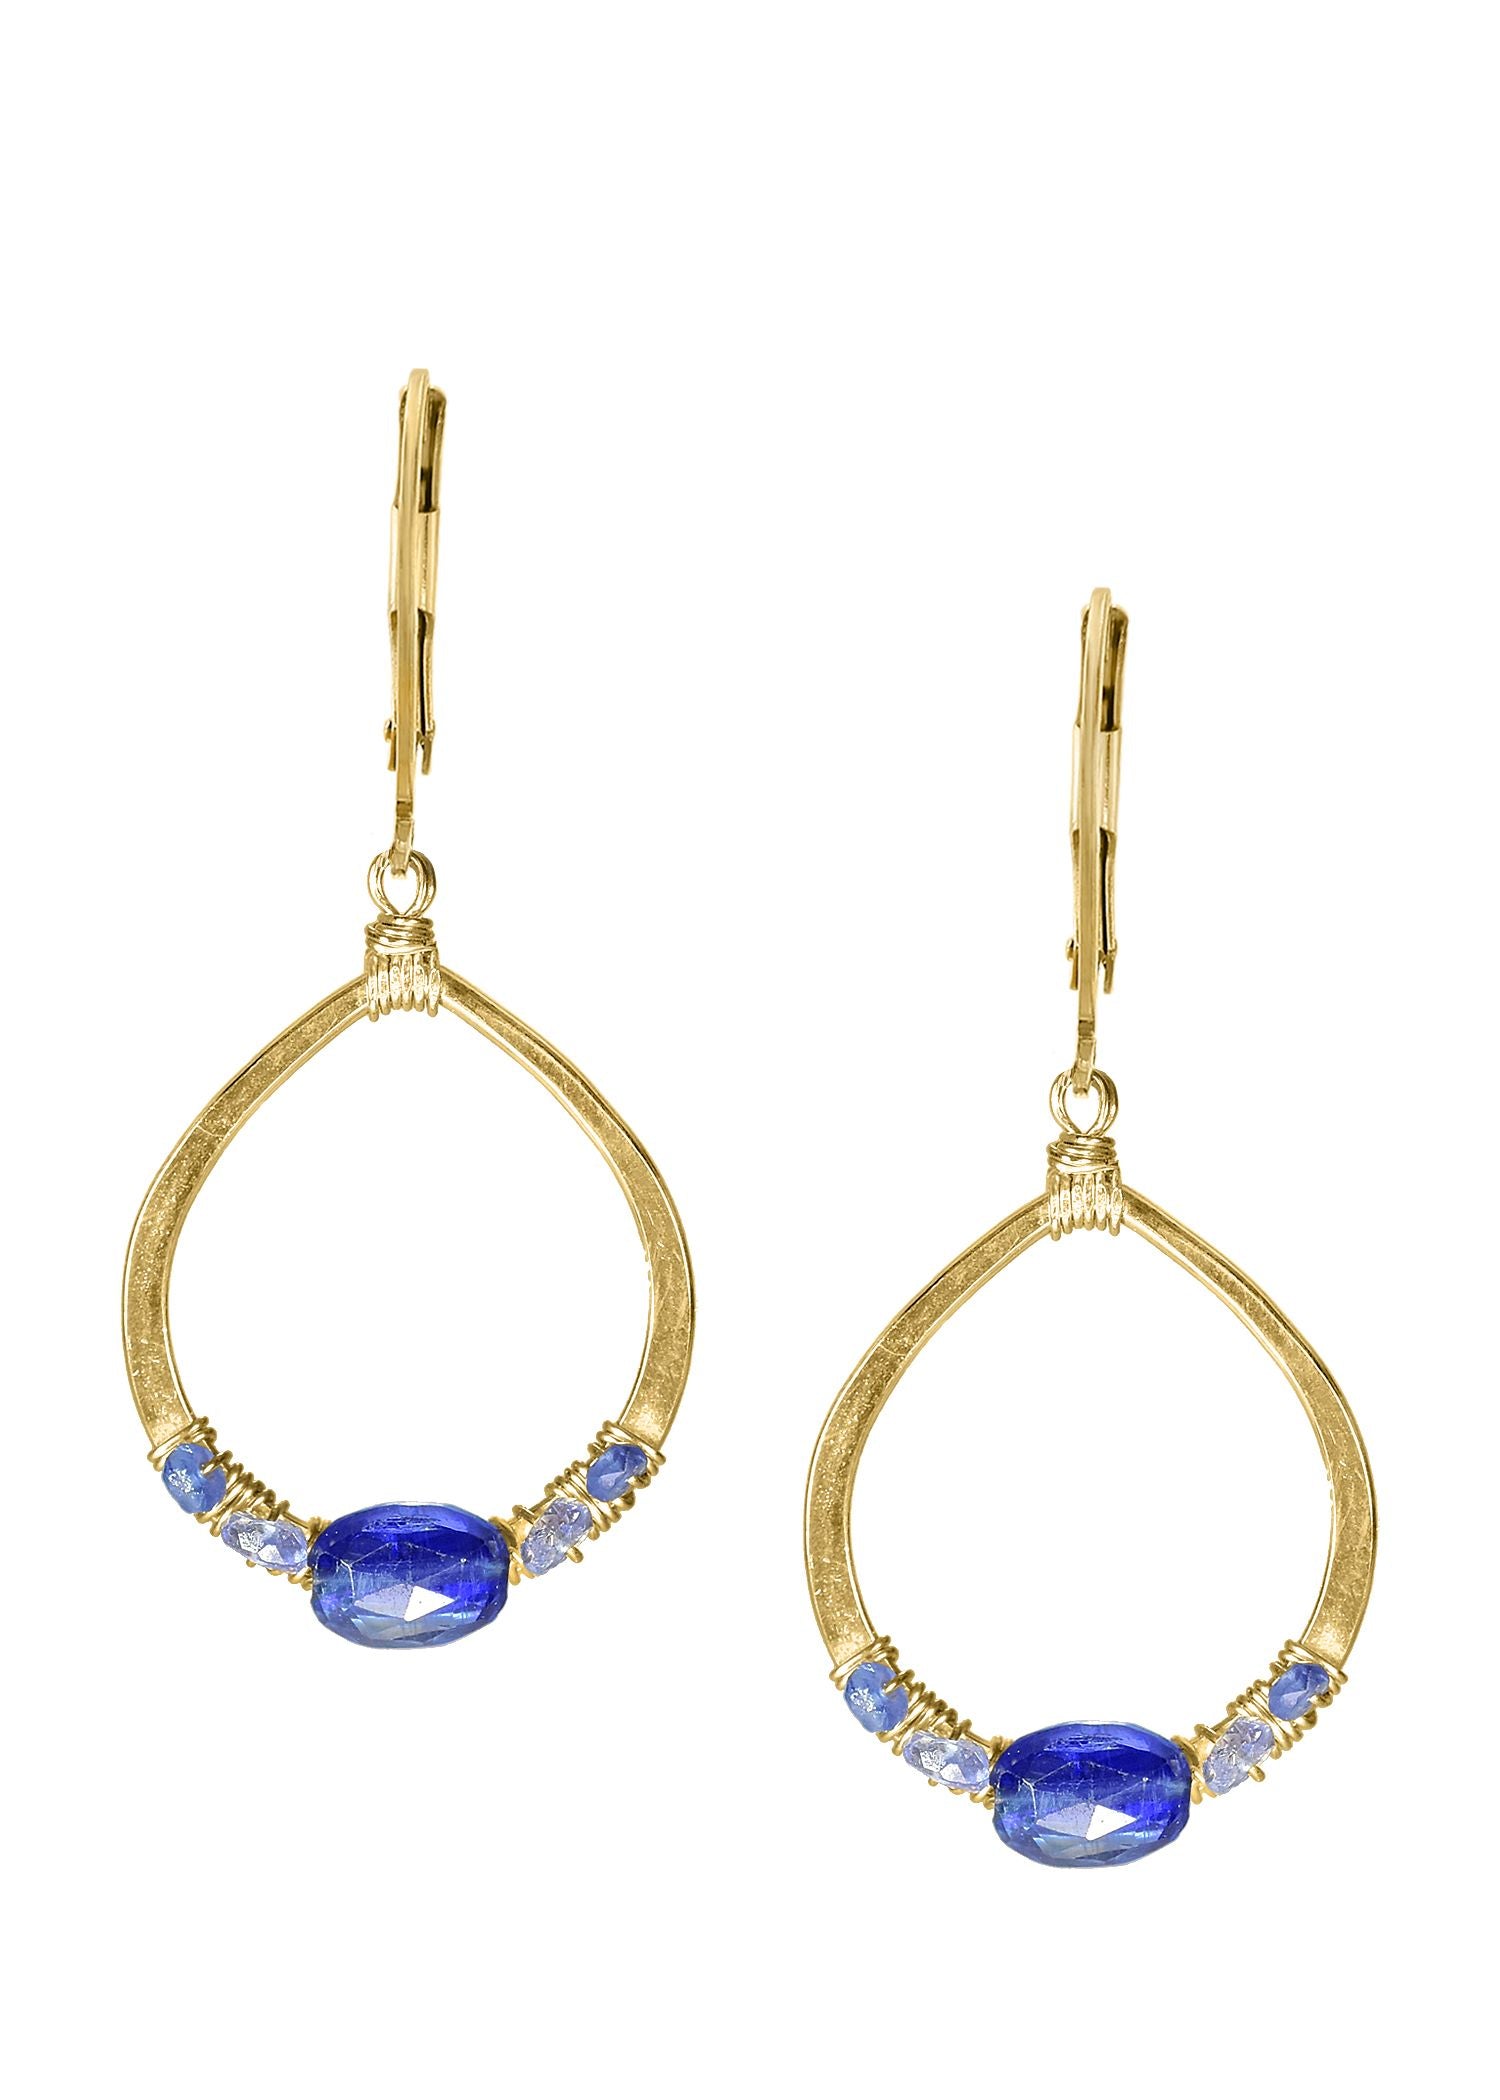 Blue sapphire Kyanite Tanzanite 14k gold fill Earrings measure 1-1/2" in length (including the levers) and 5/8" in width Handmade in our Los Angeles studio